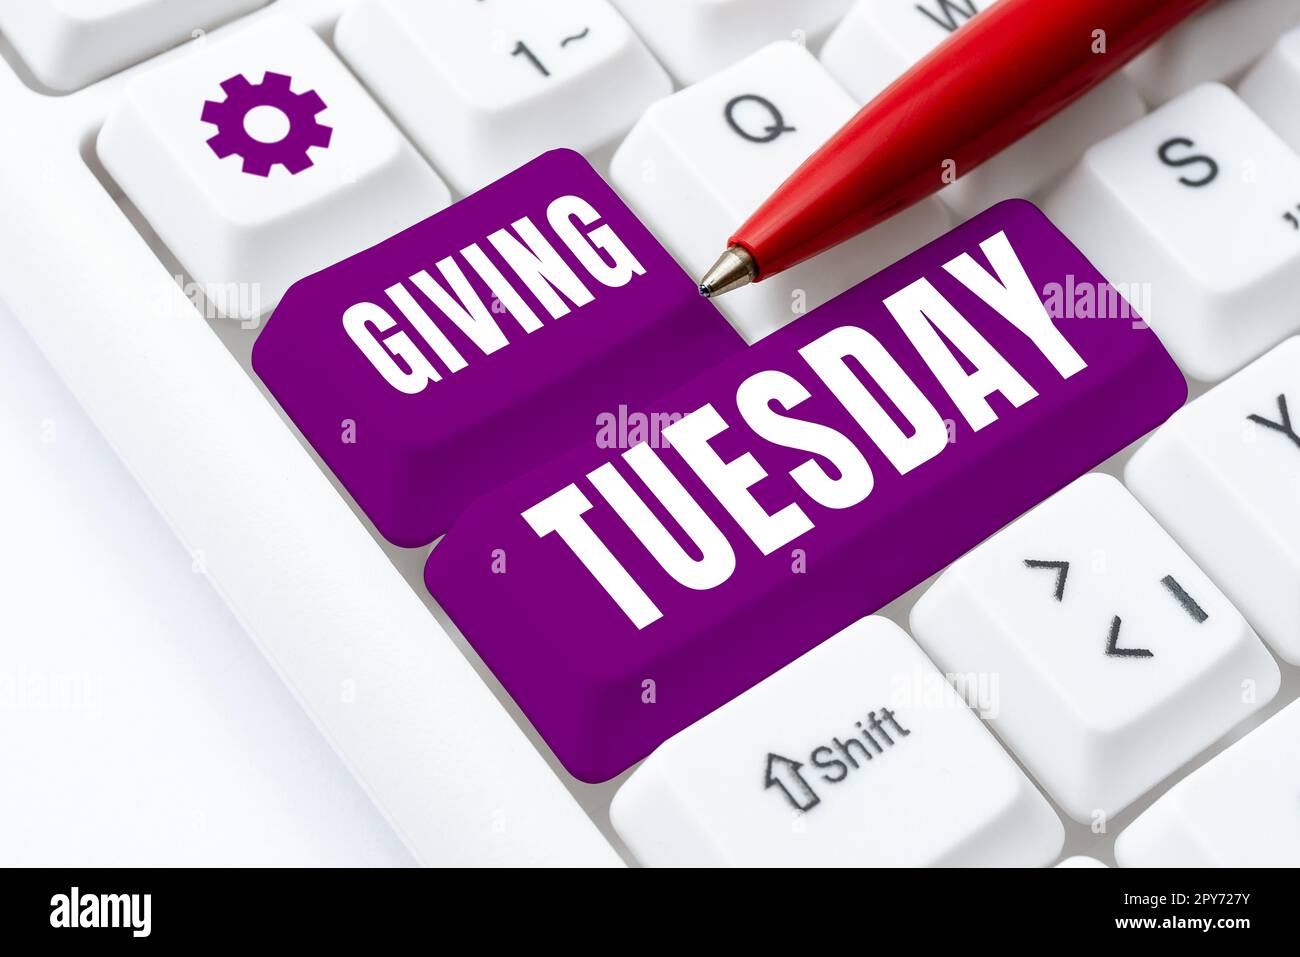 Conceptual caption Giving Tuesday. Business showcase international day of charitable giving Hashtag activism Stock Photo